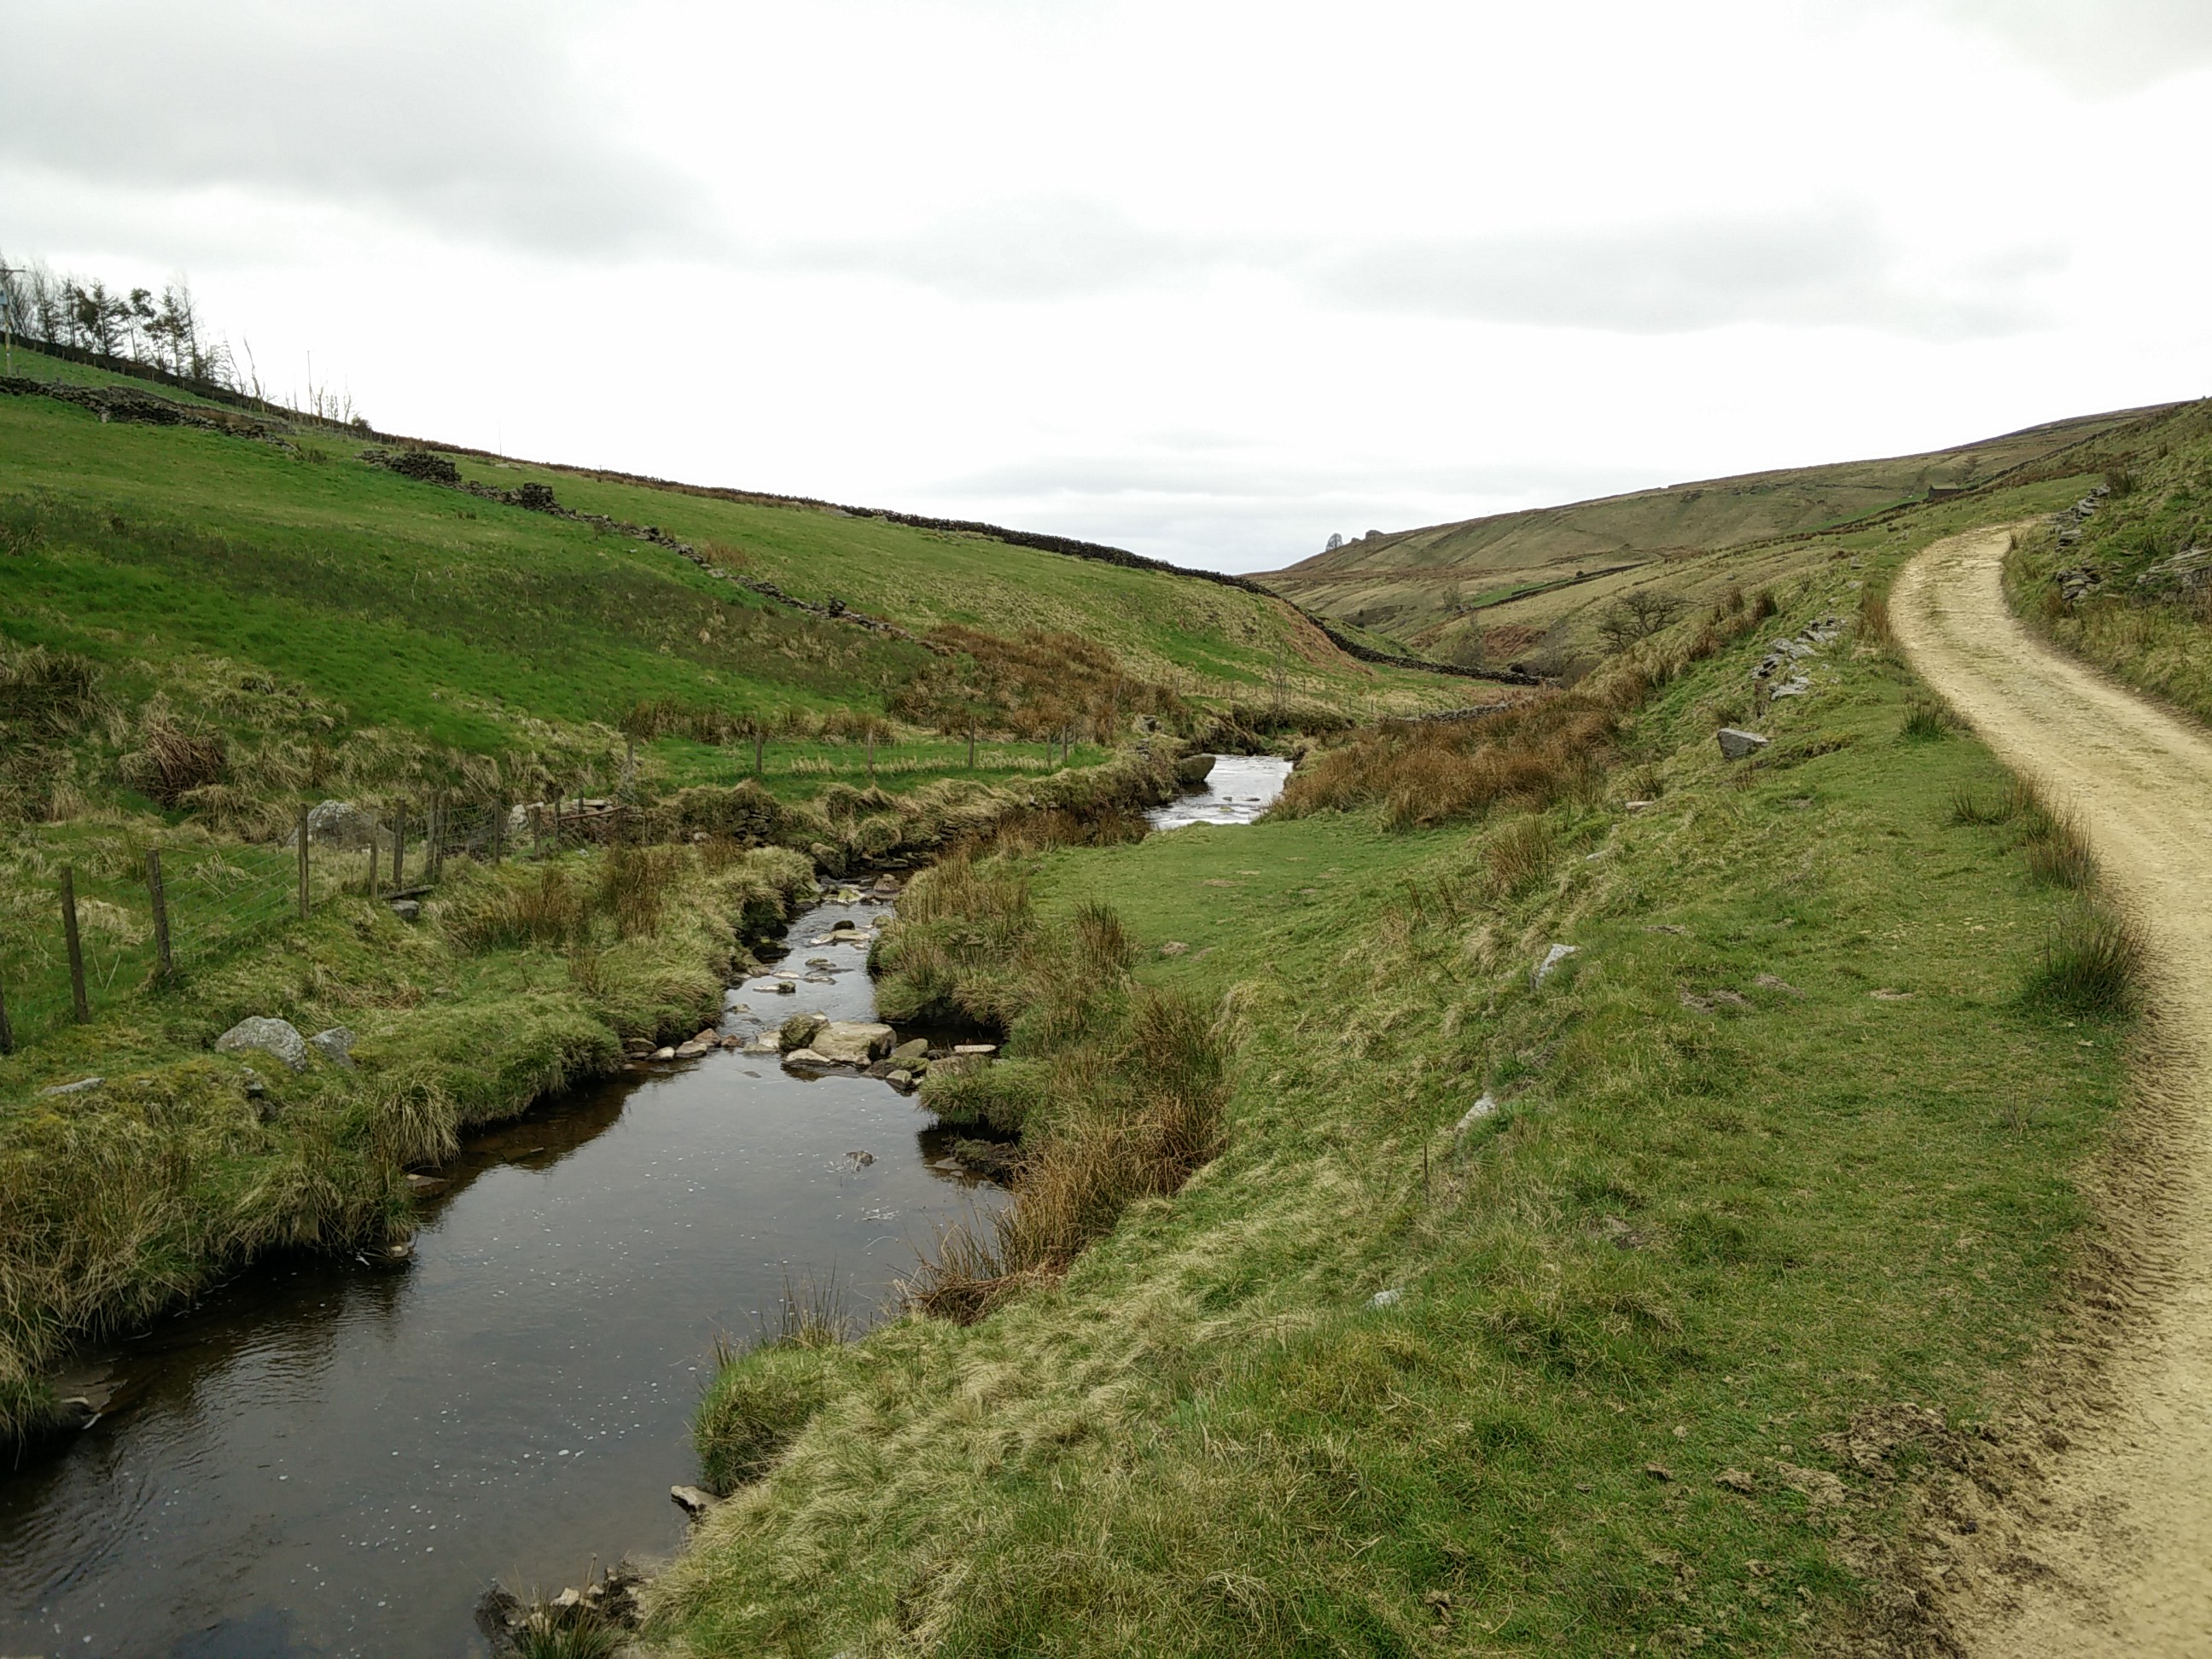 View of a river in Calderdale